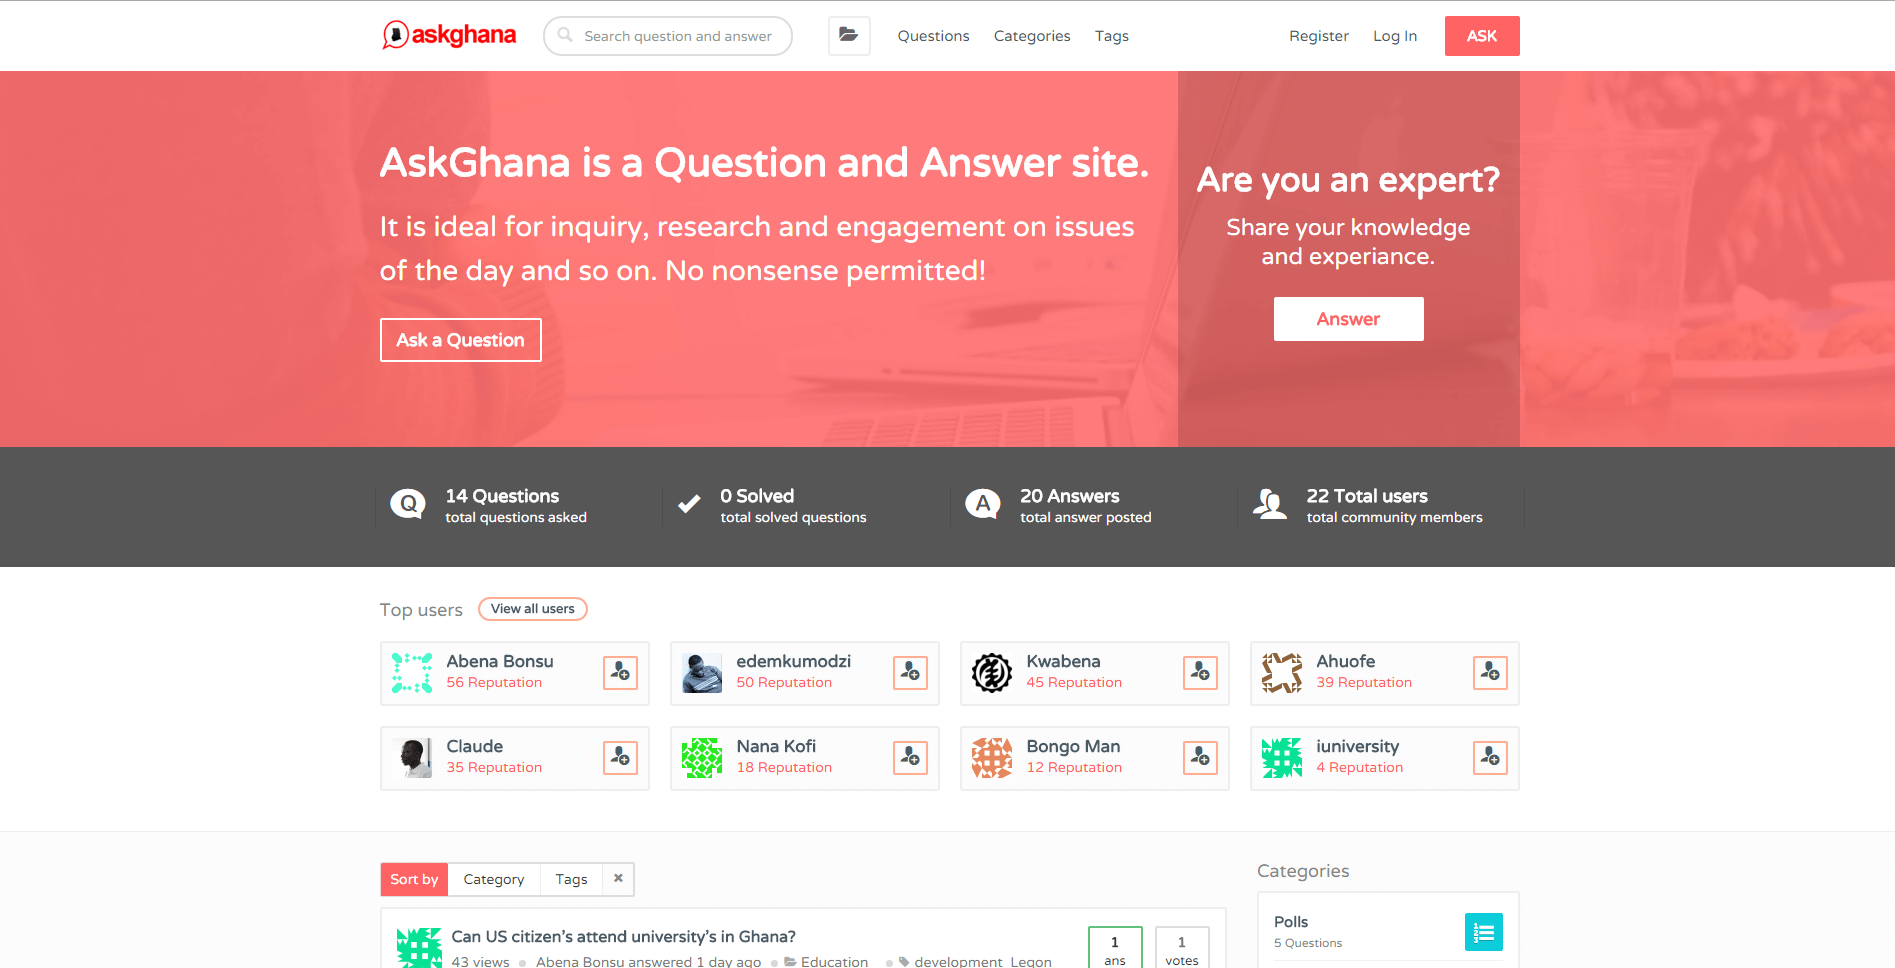 Q&A Website with Polling System